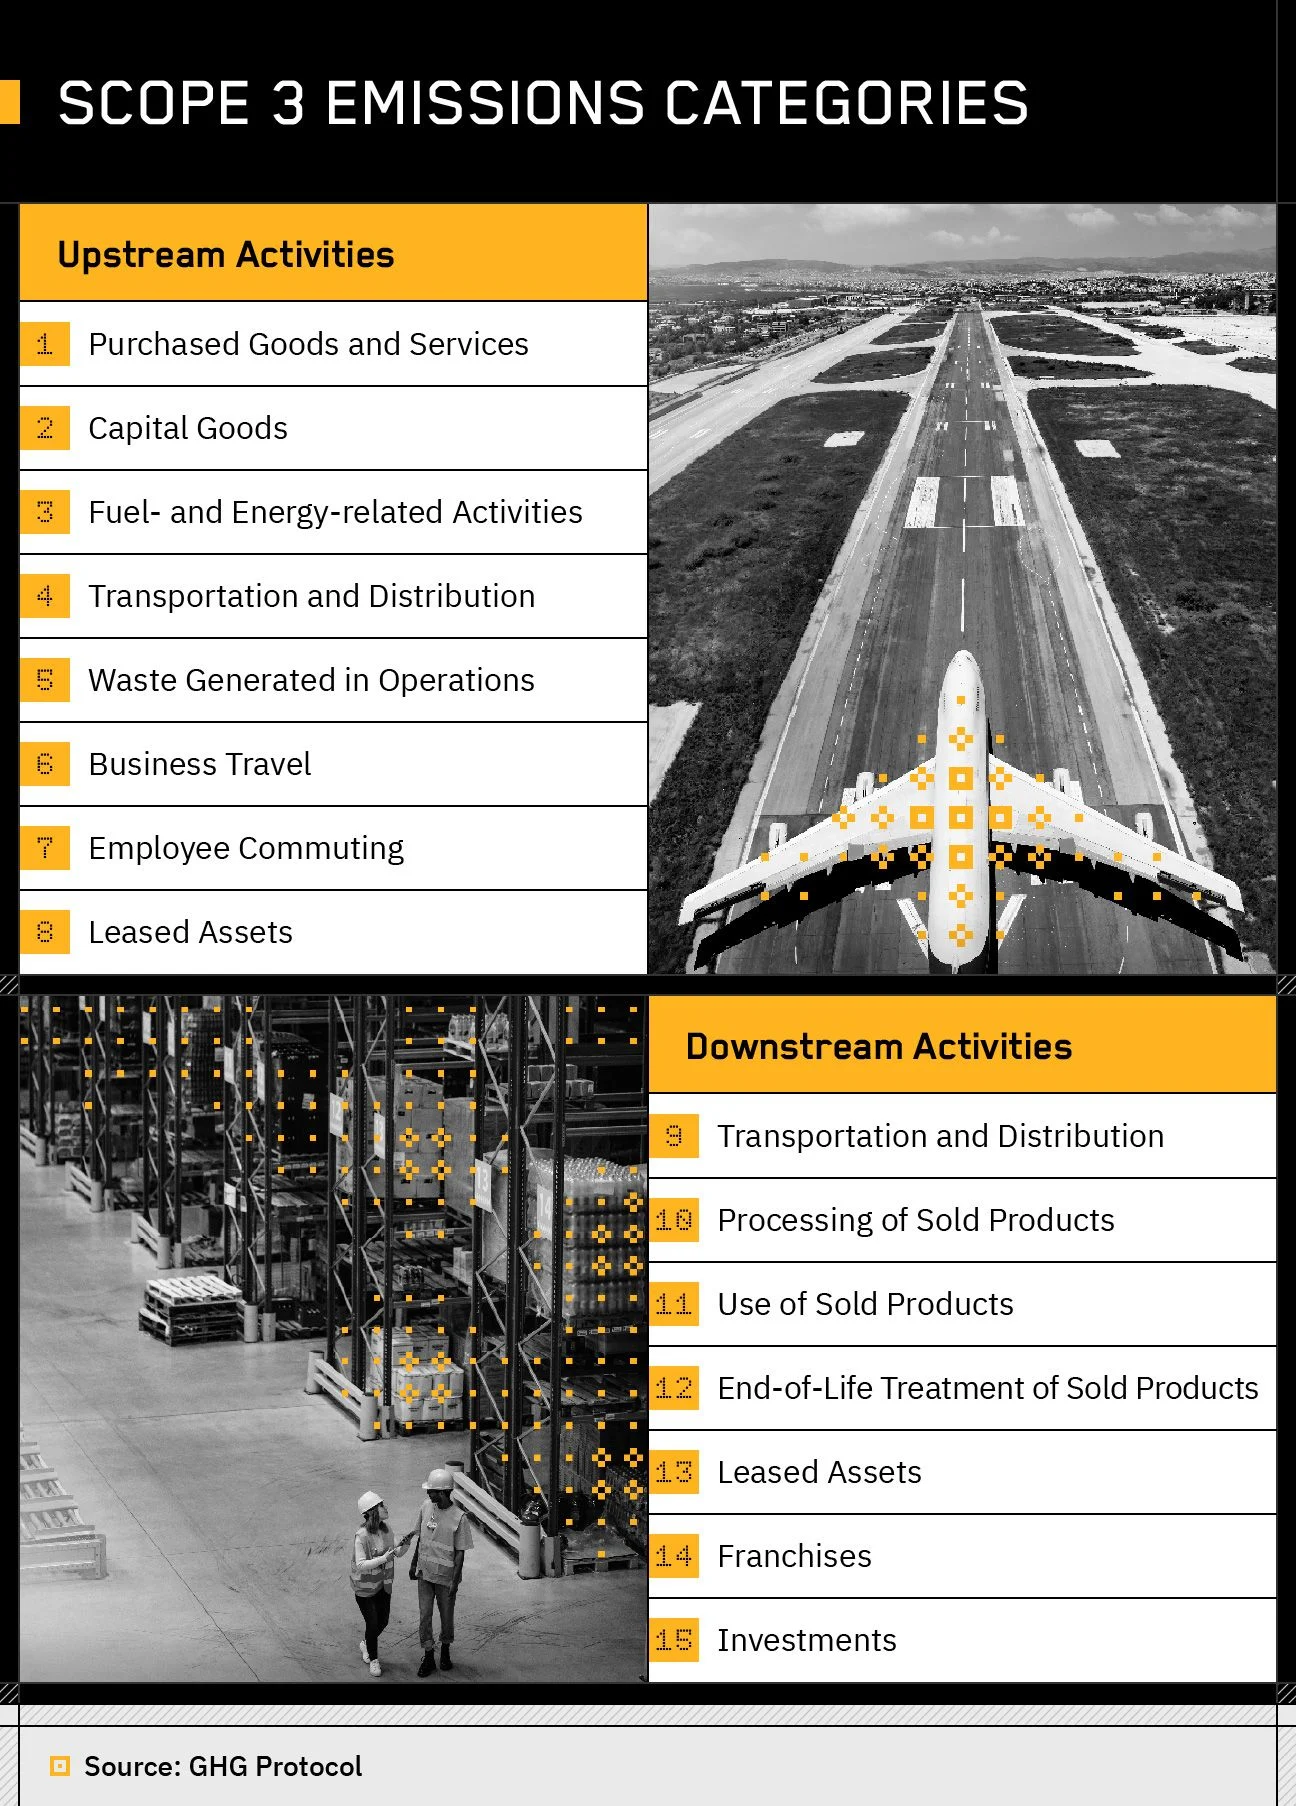 collage with black and white photos along with text boxes listing the upstream and downstream activities that make up scope 3’s emission categories